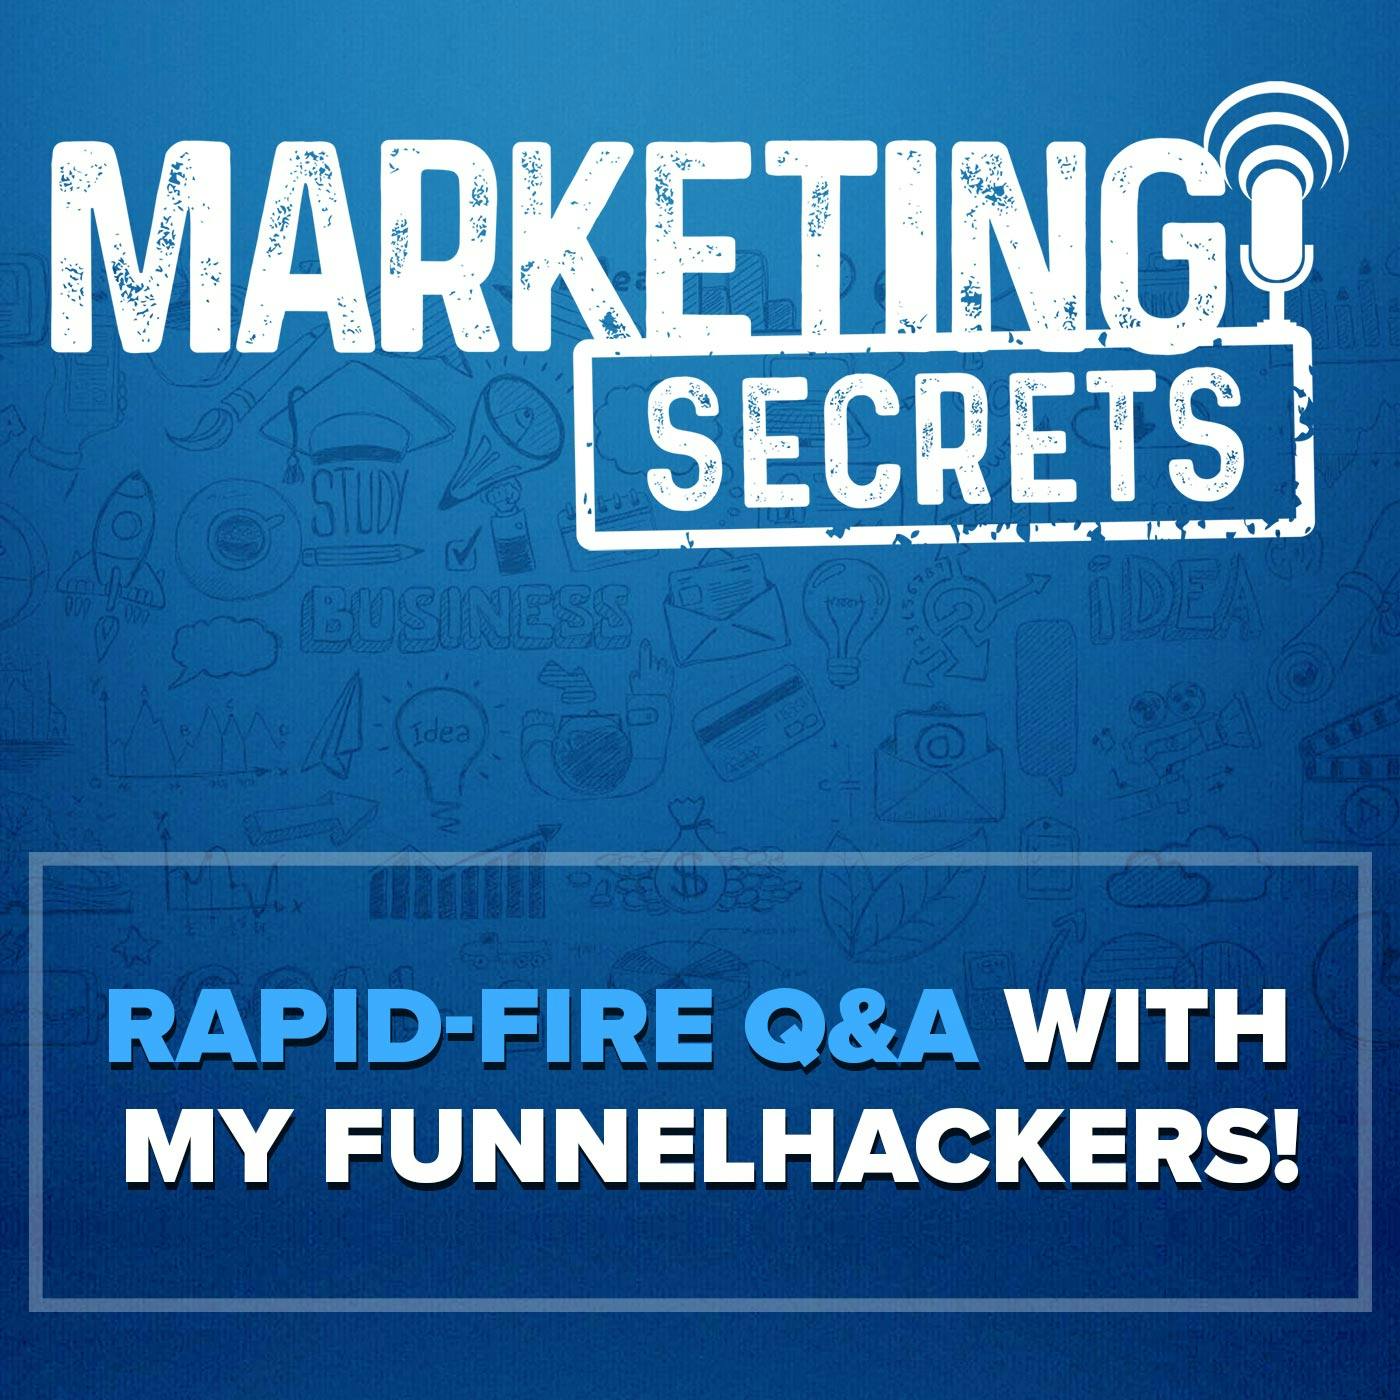 Rapid-Fire Q&A With My FunnelHackers!